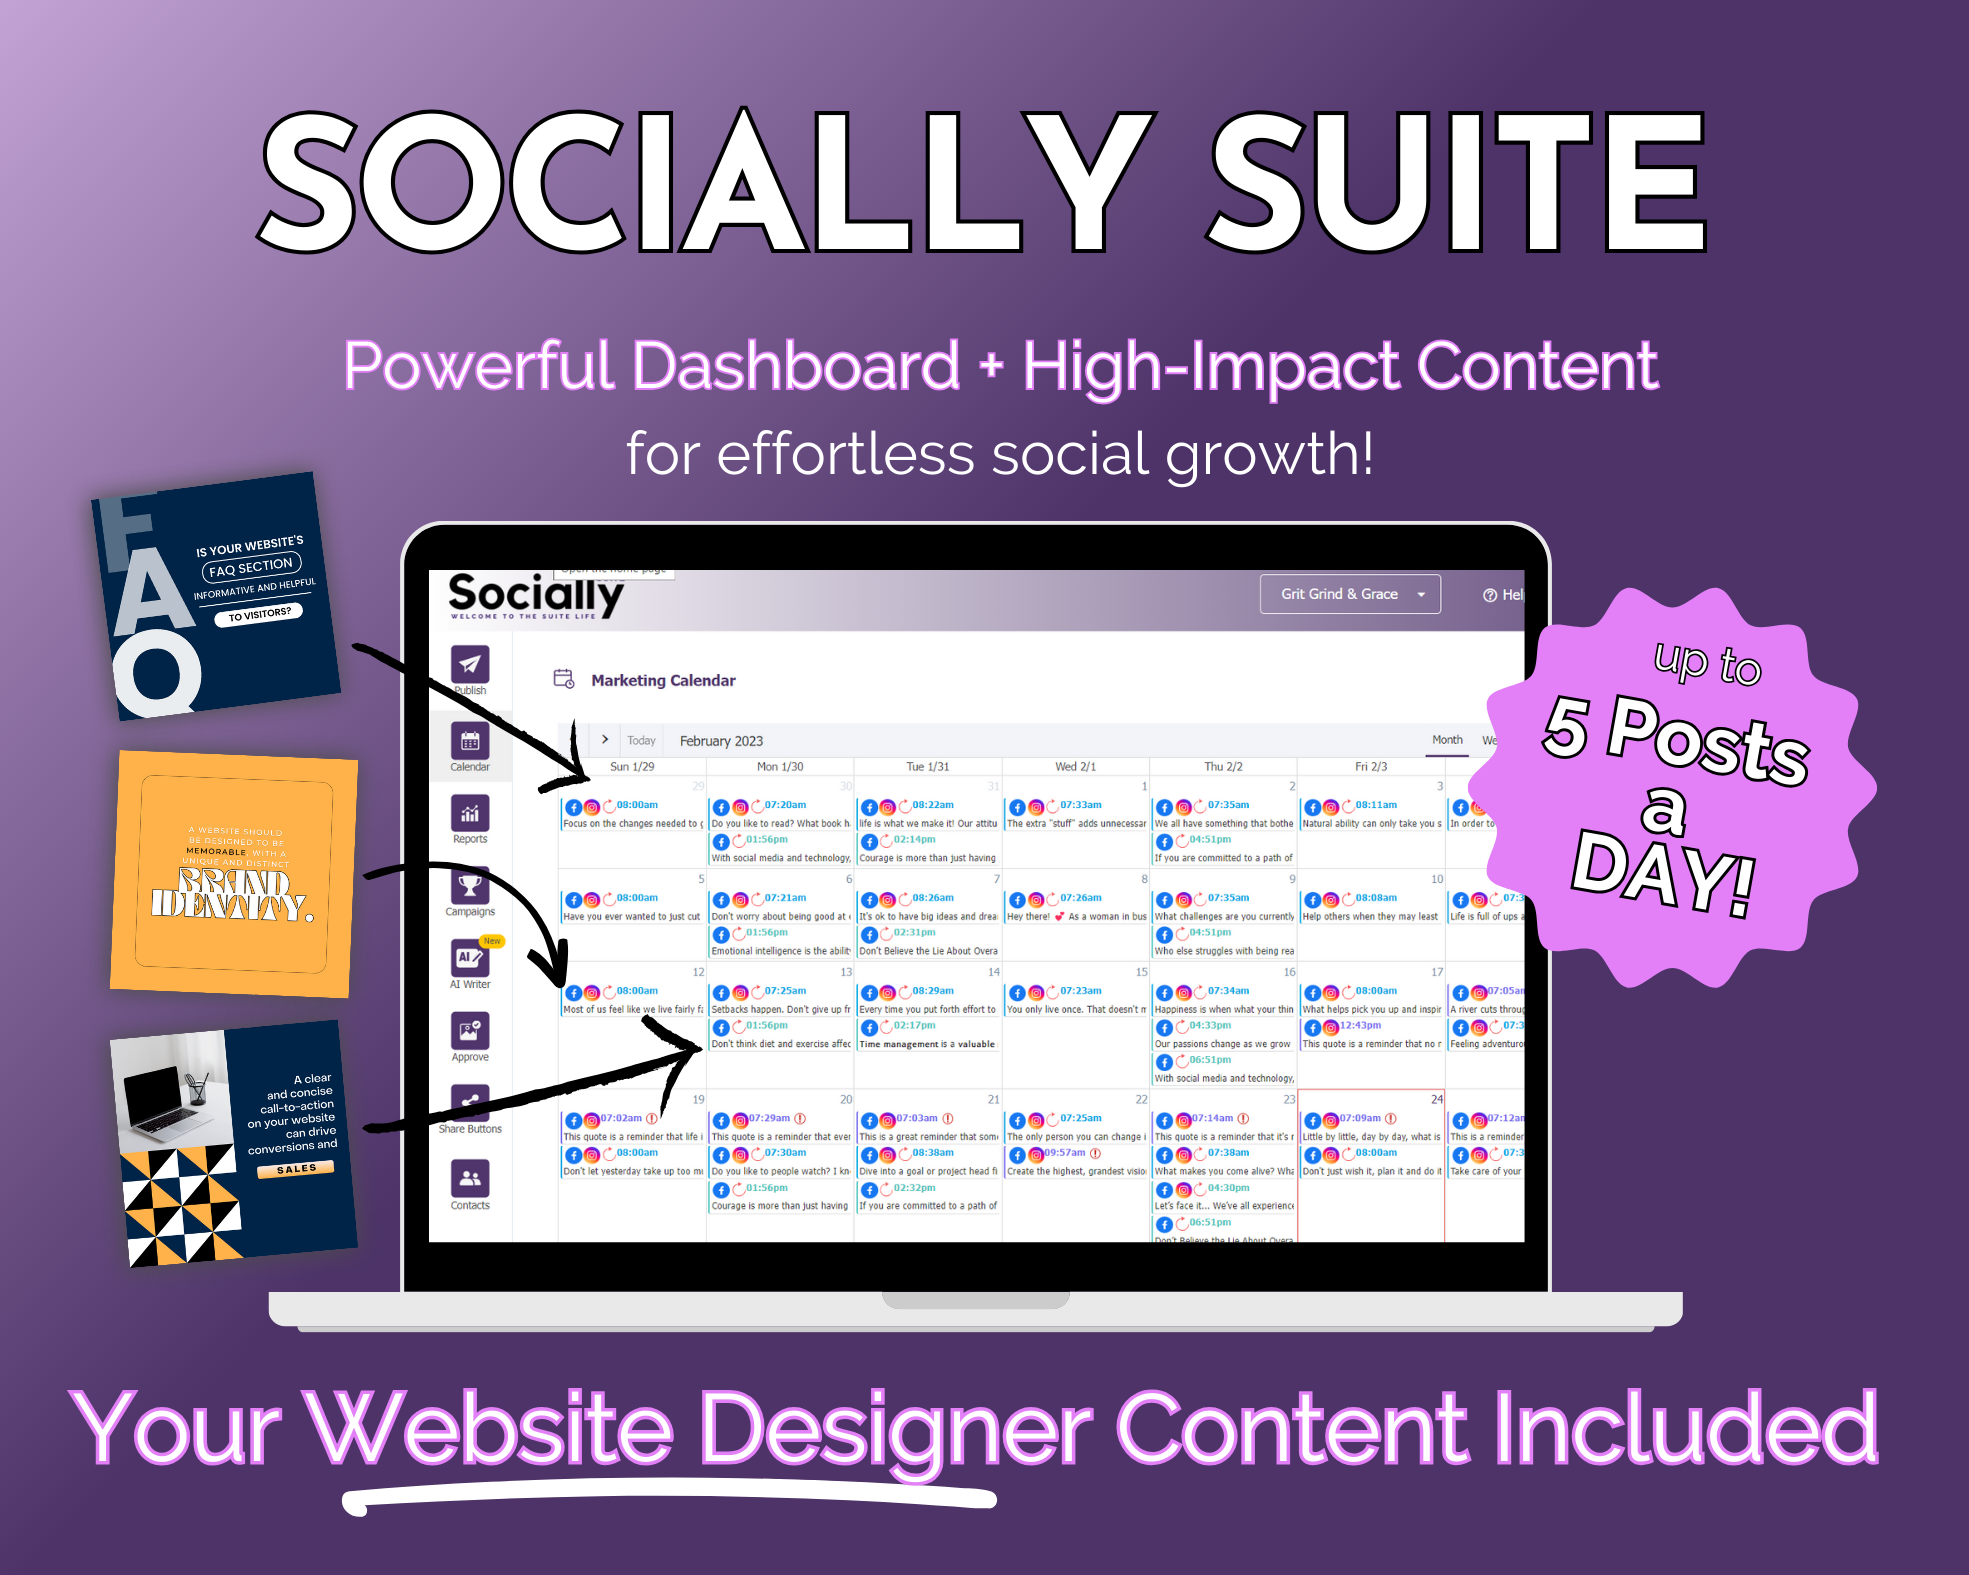 A promotional graphic for "Get Socially Inclined's Socially Suite Membership," highlighting a social media marketing management dashboard and offering website designer content with a capability of up to 5 posts a day.